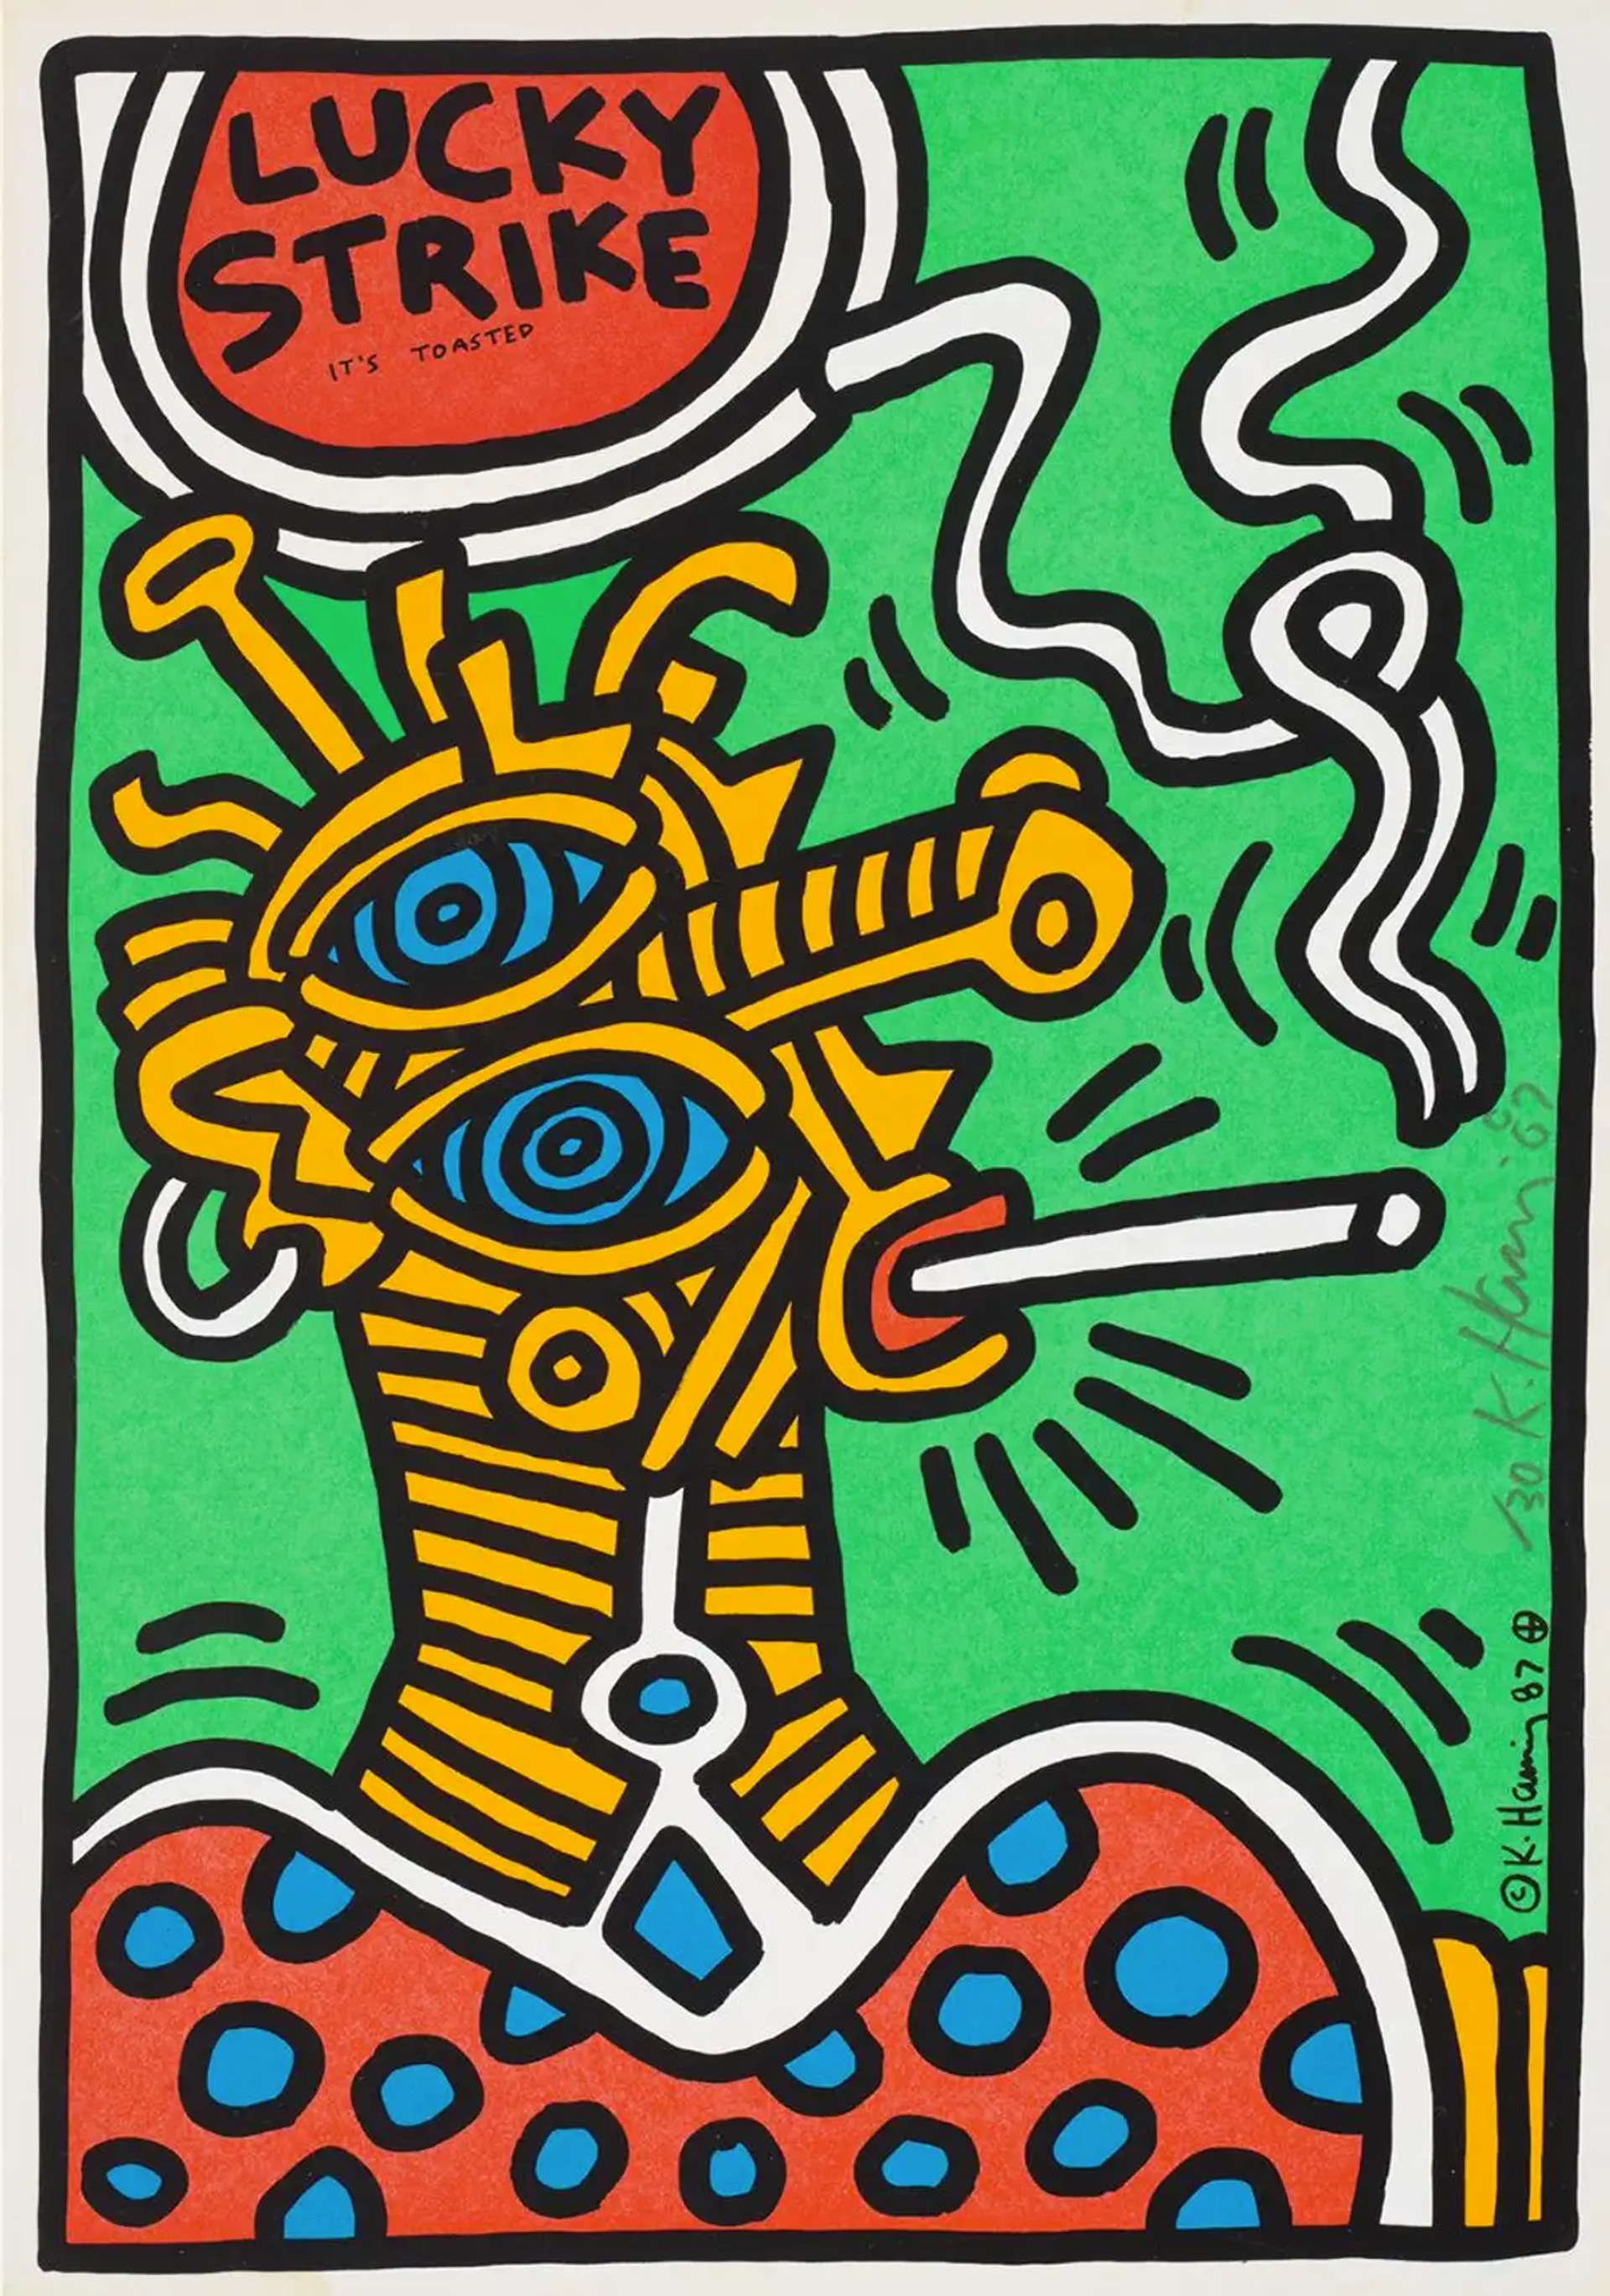 An abstract-like figure, depicted in bold lines and shown in yellow, is seen smoking a cigarette against a green background. The Lucky Strike logo is in the top right corner.